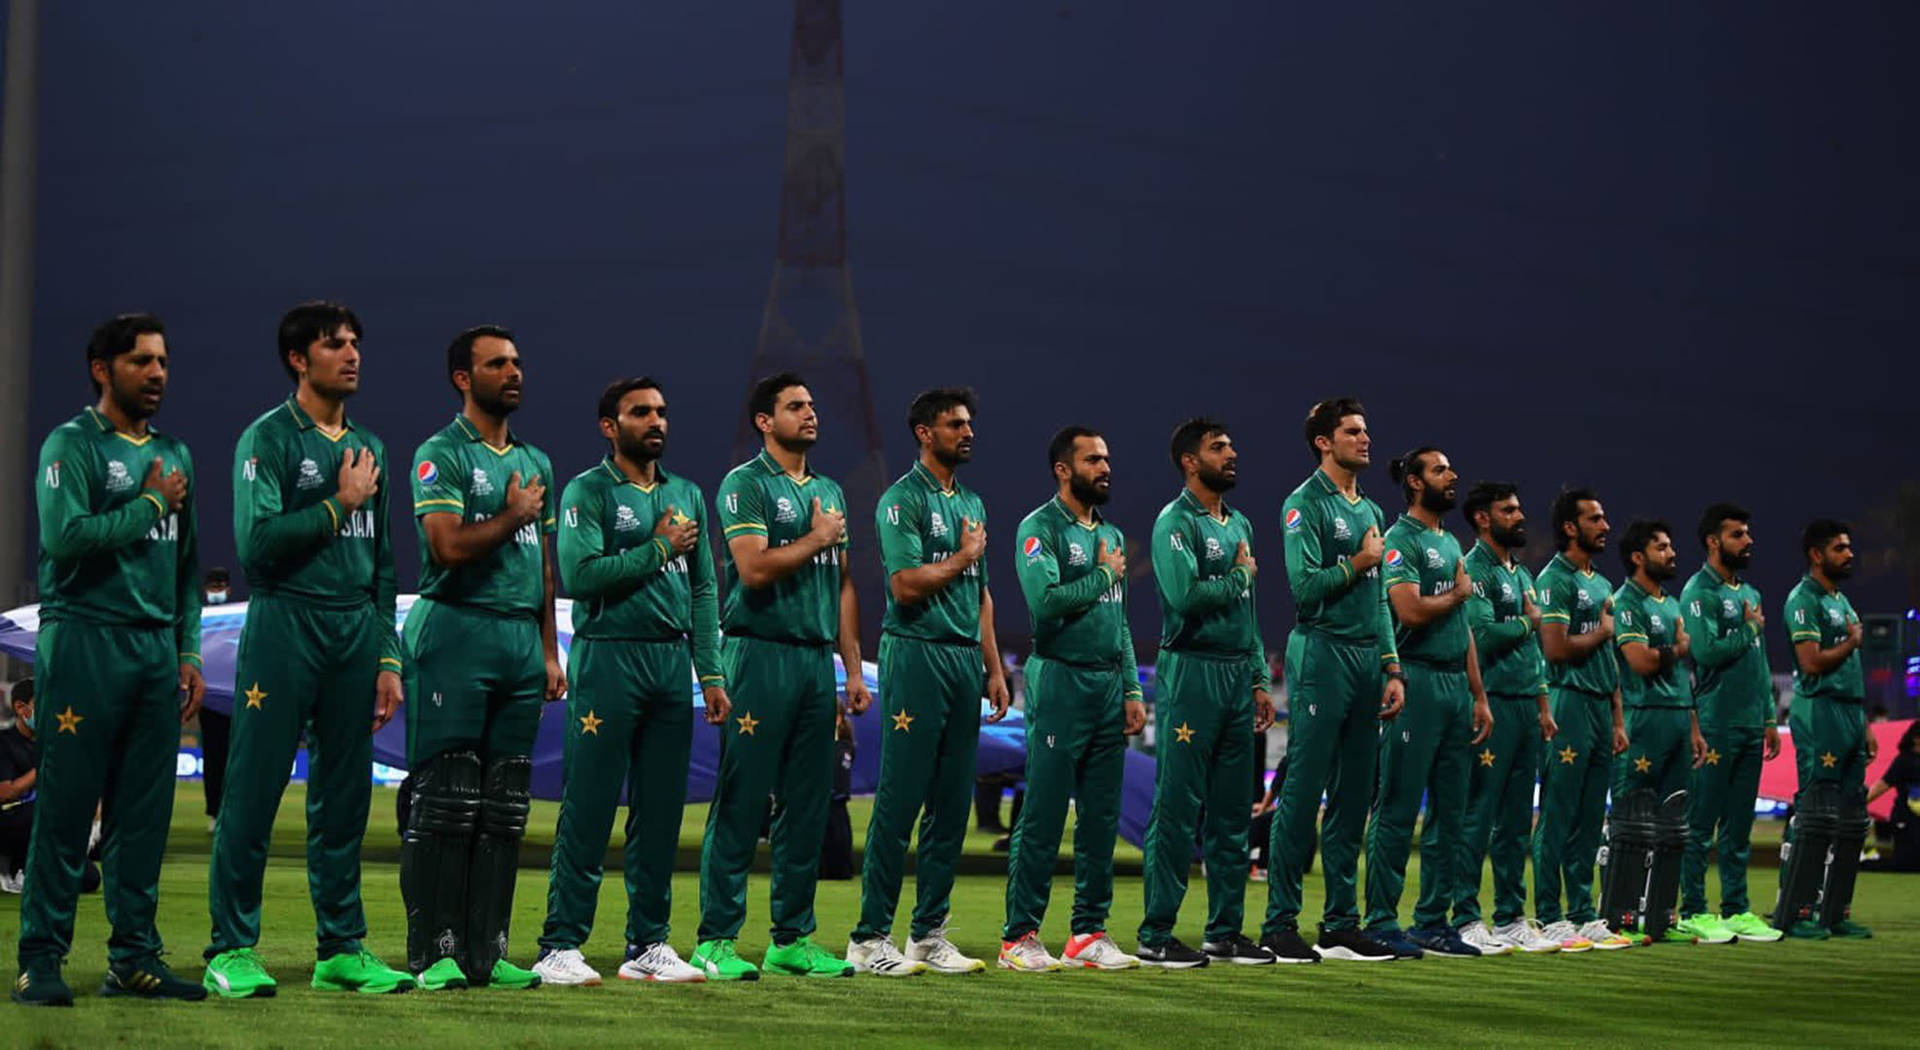 Pakistan Cricket Team Giving Salute During National Anthem